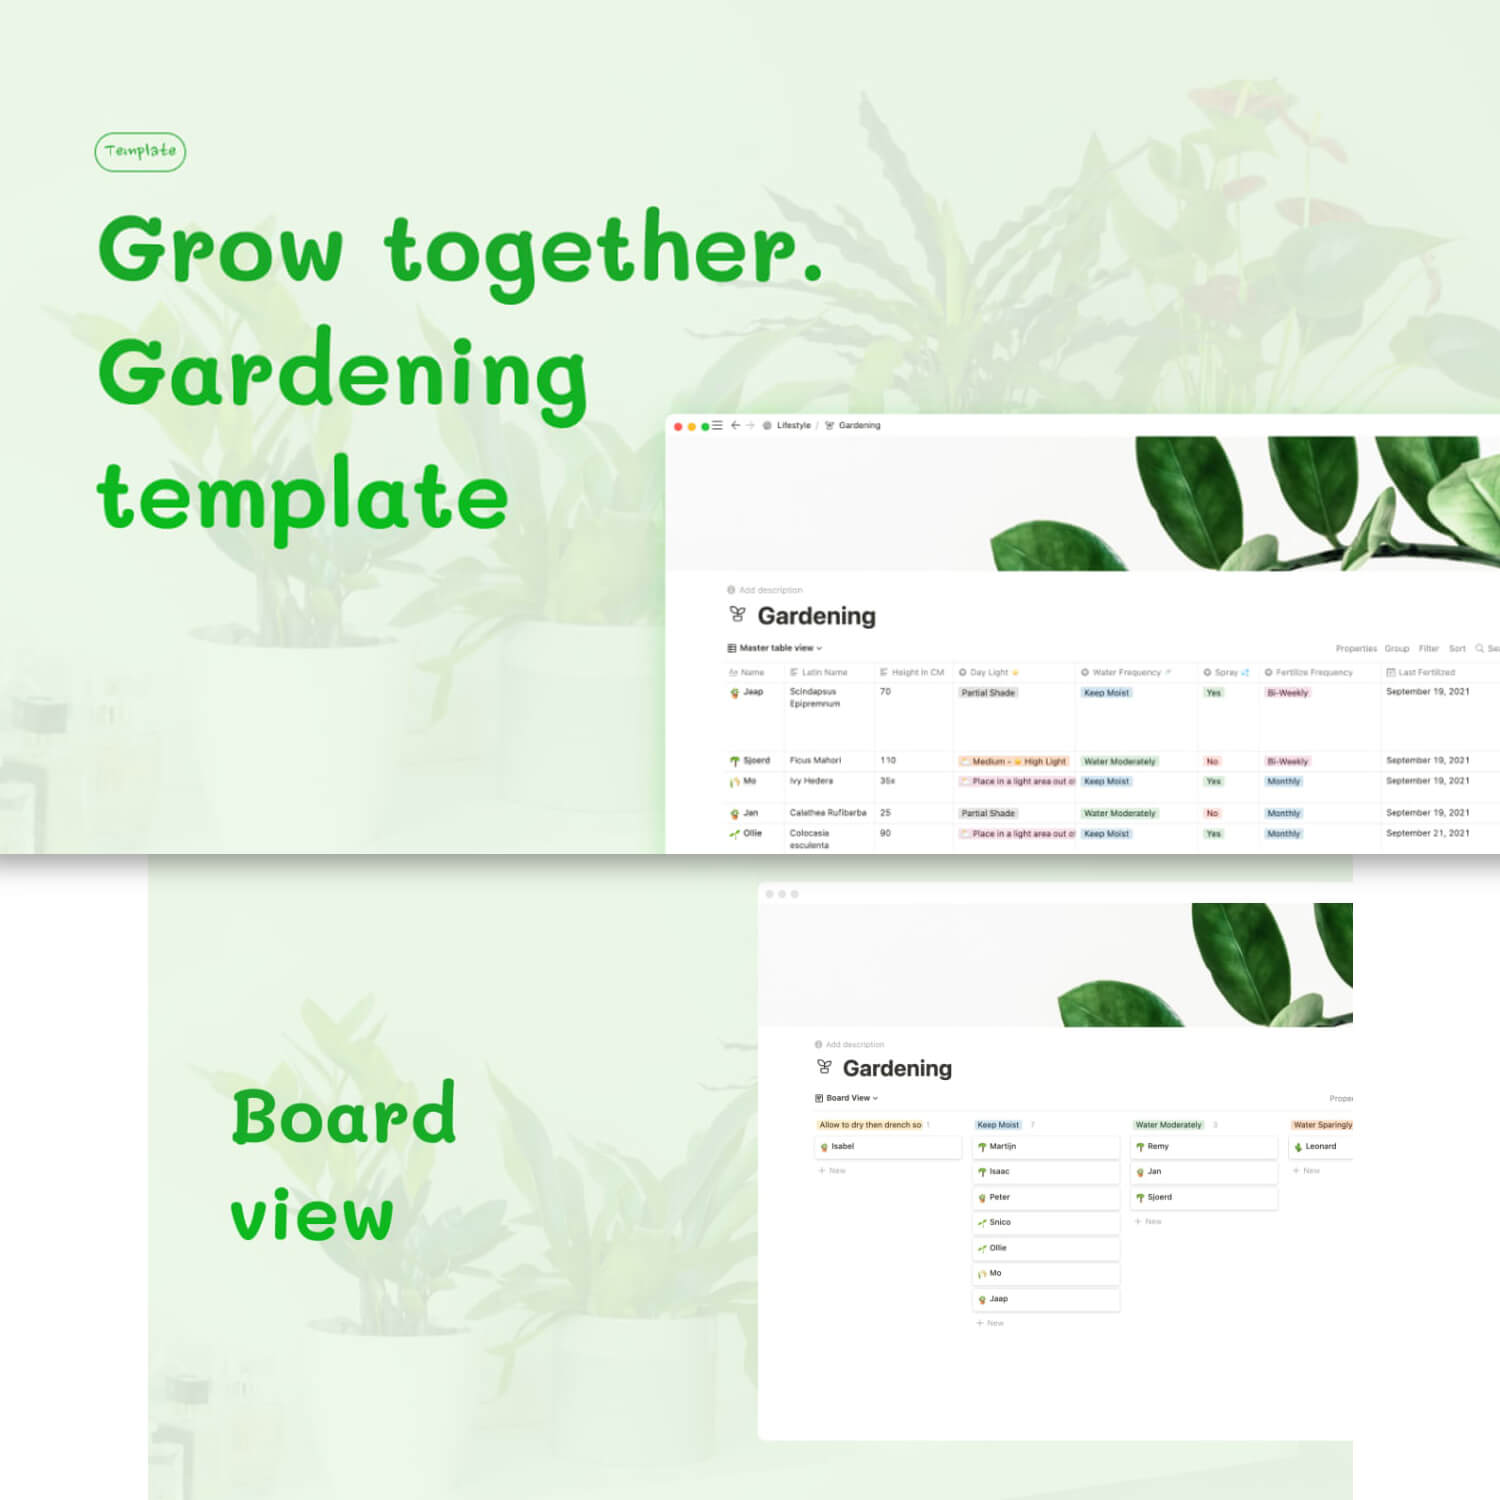 Two slides: first slide about gardening template, second slide about board view.